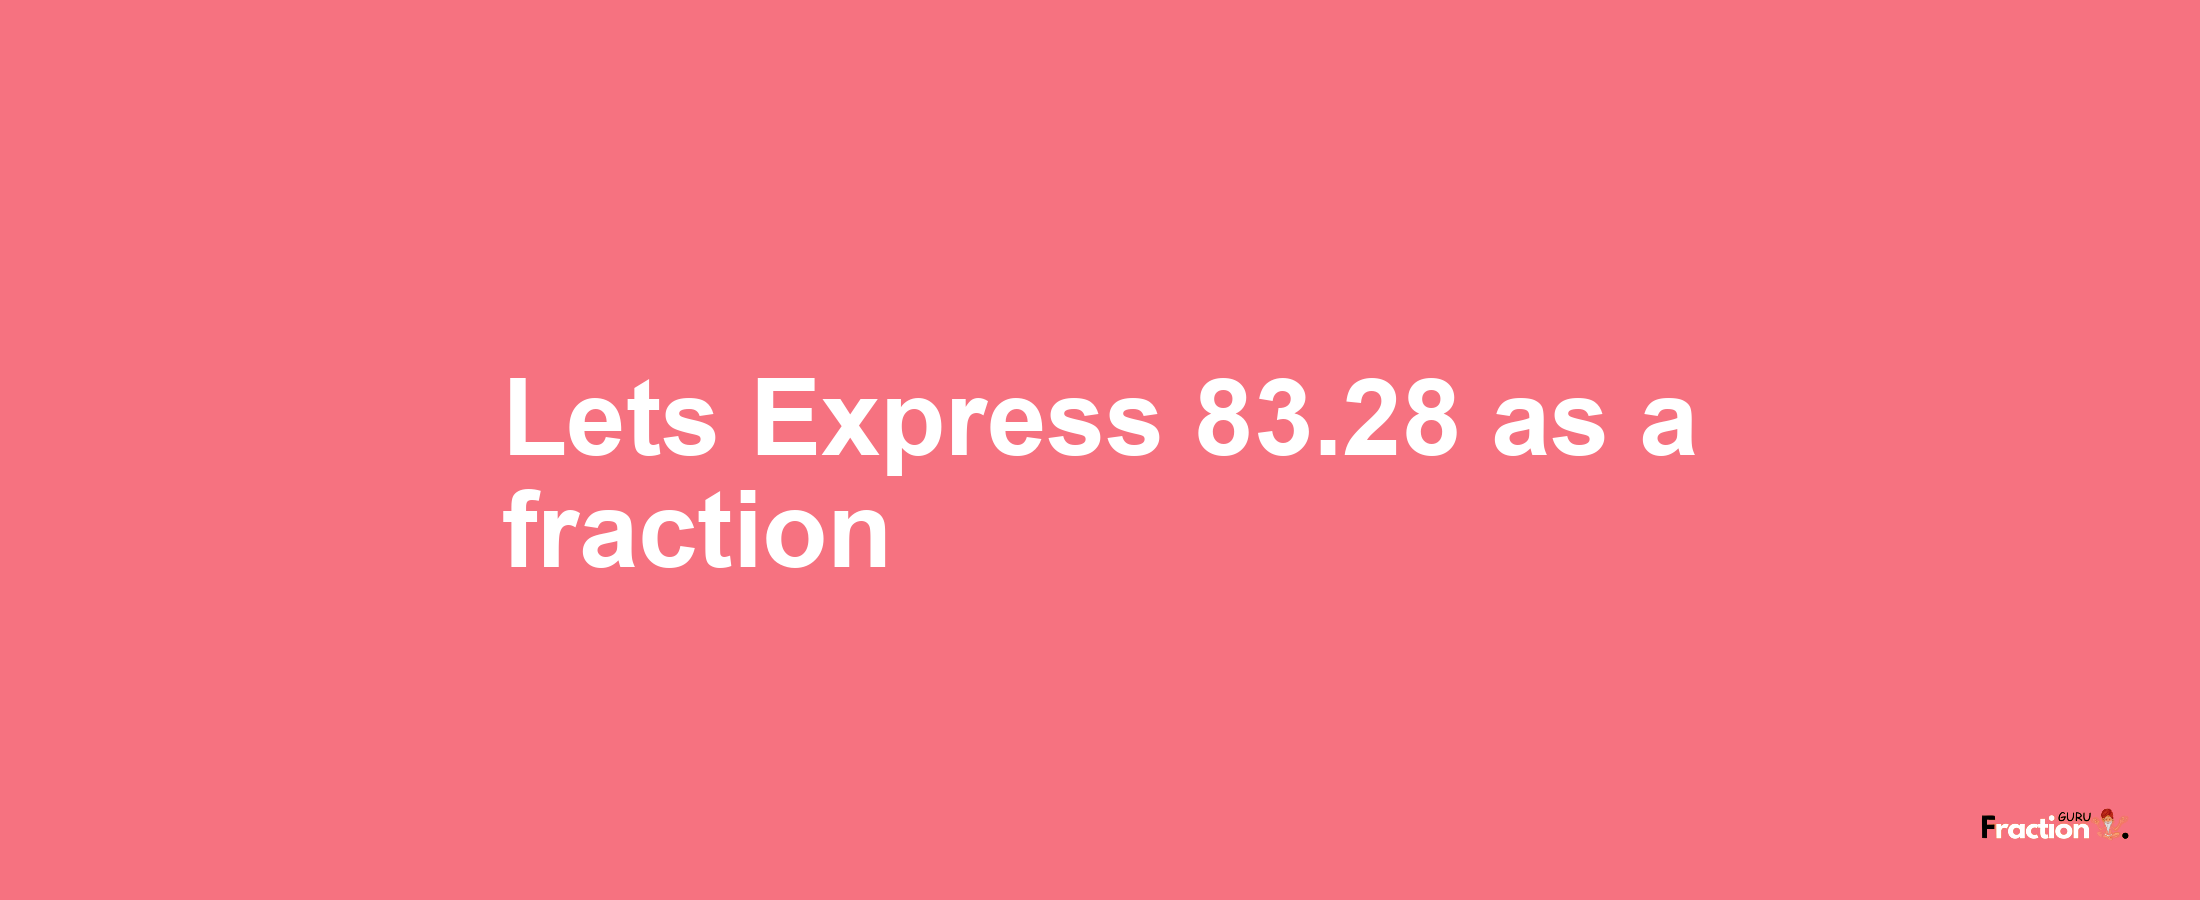 Lets Express 83.28 as afraction